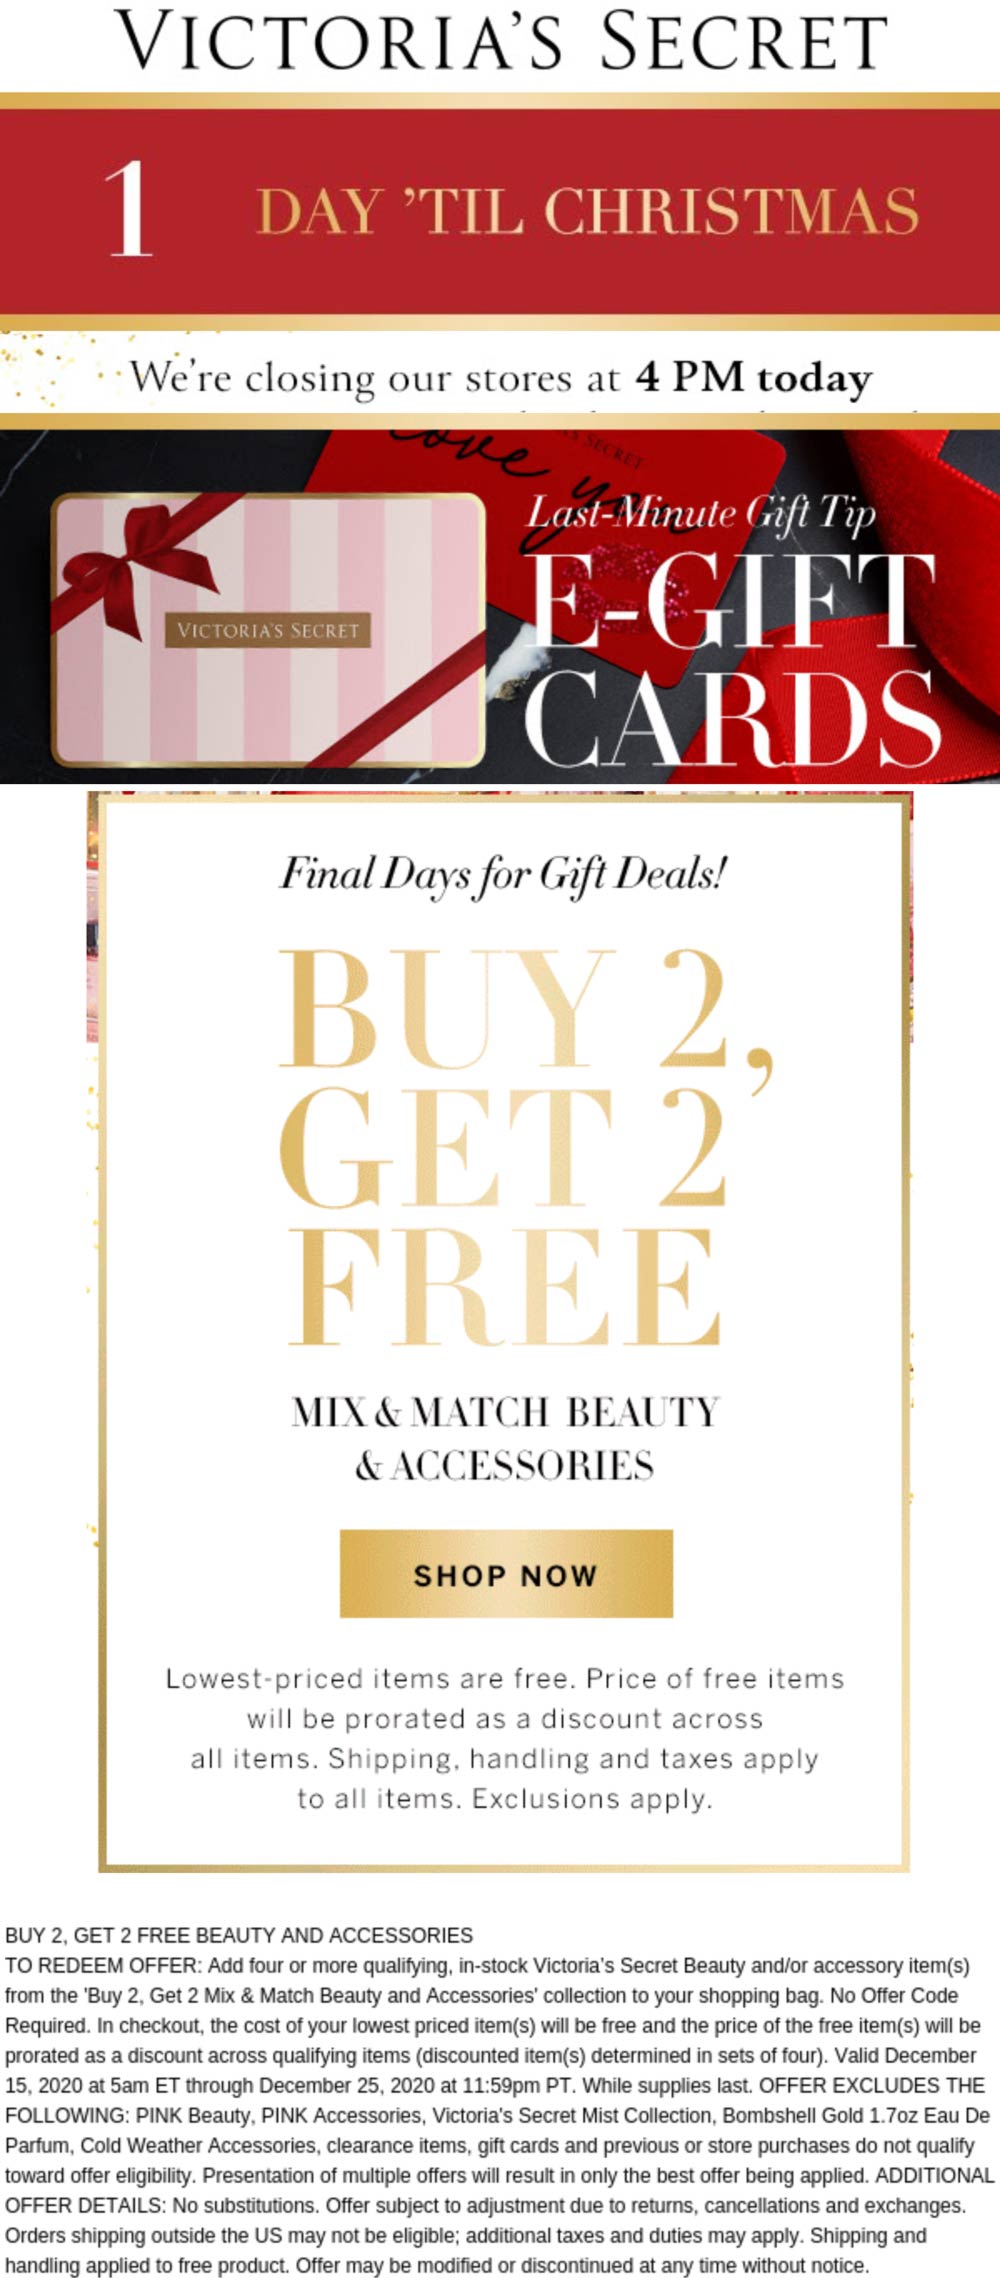 Victorias Secret stores Coupon  4-for-2 on beauty & accessories at Victorias Secret #victoriassecret 